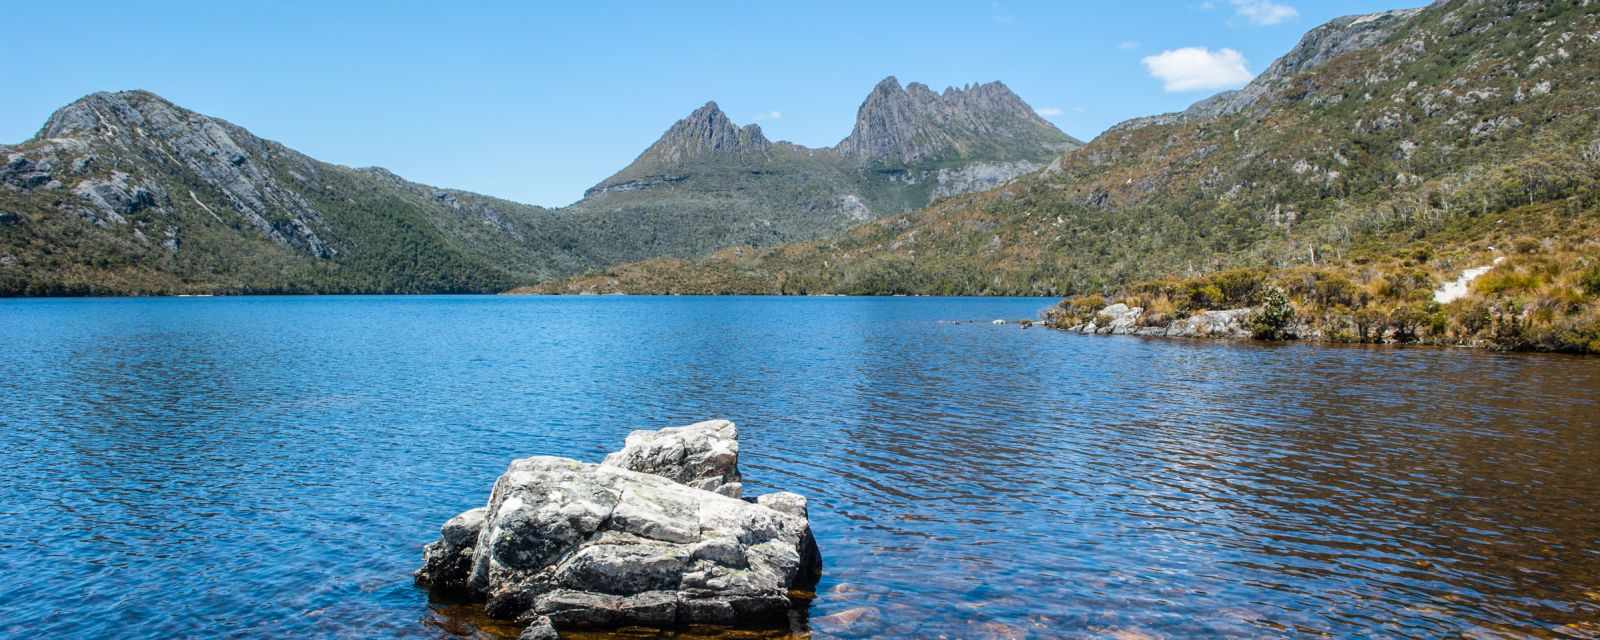 Cradle Mountain - 5 Hikes and Walks + Wildlife Guide